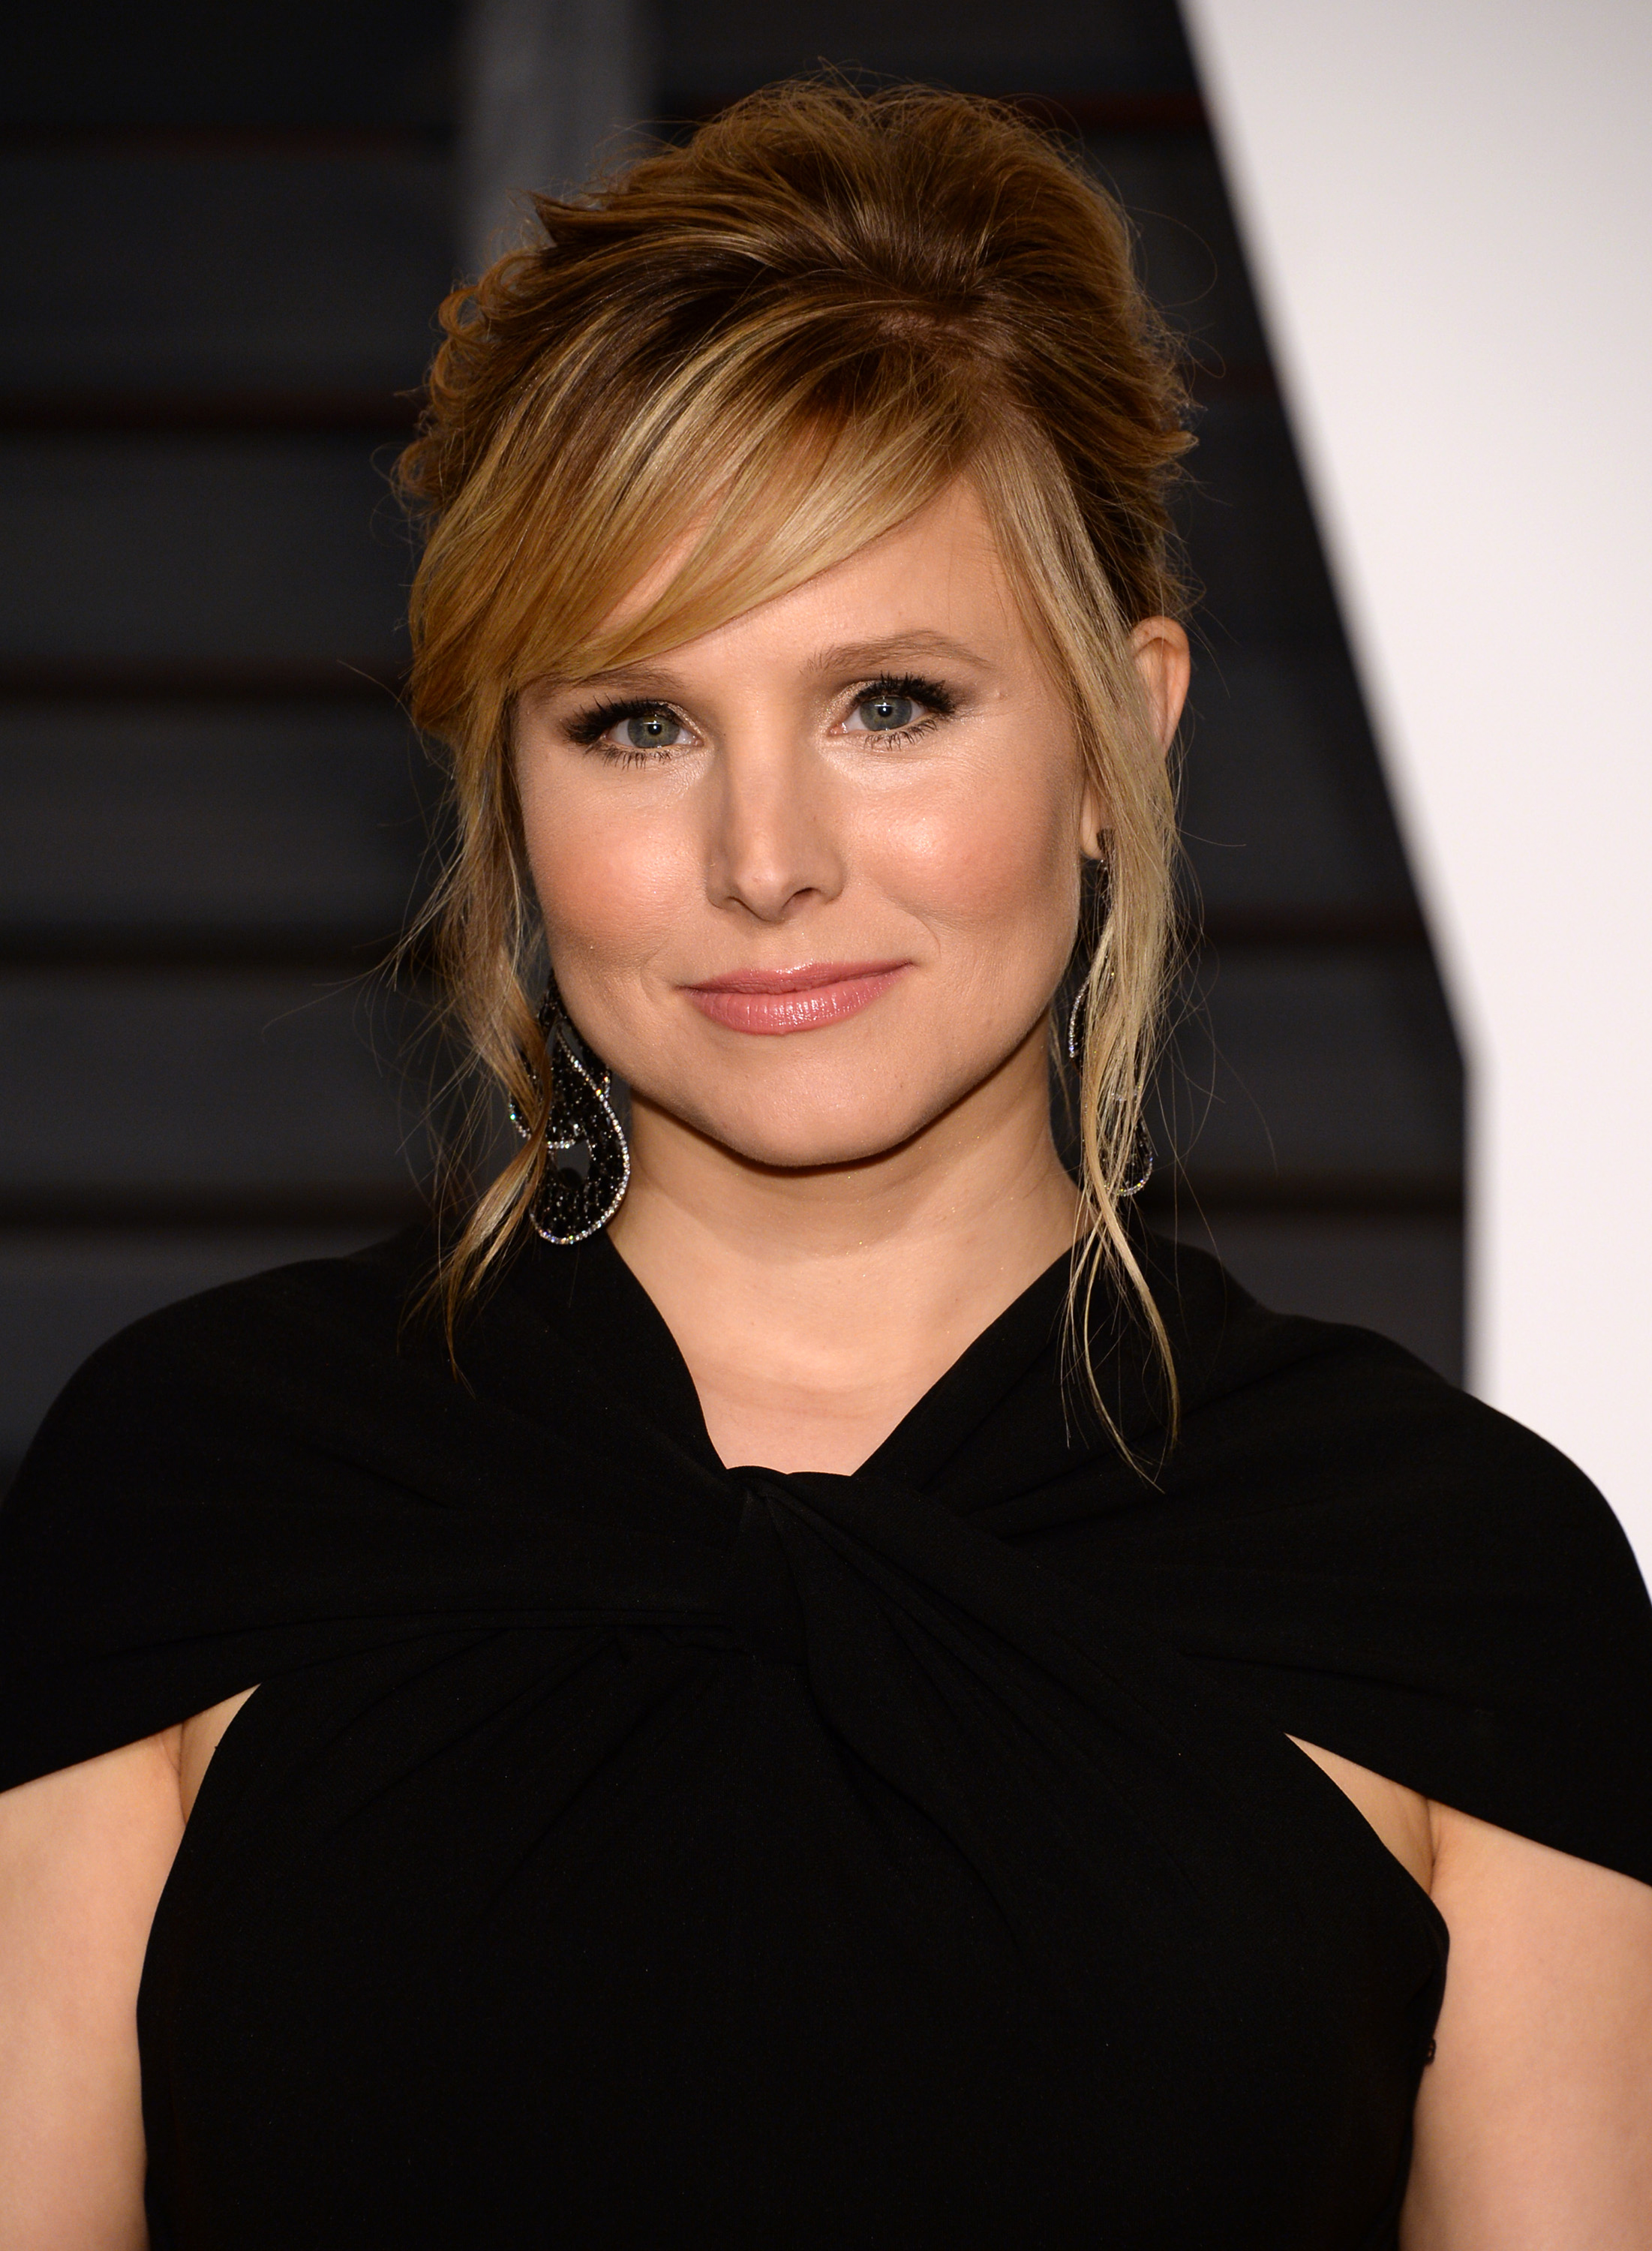 Kristen Bell arrives at the 2015 Vanity Fair Oscar Party on Feb. 22, 2015, in Beverly Hills, Calif.